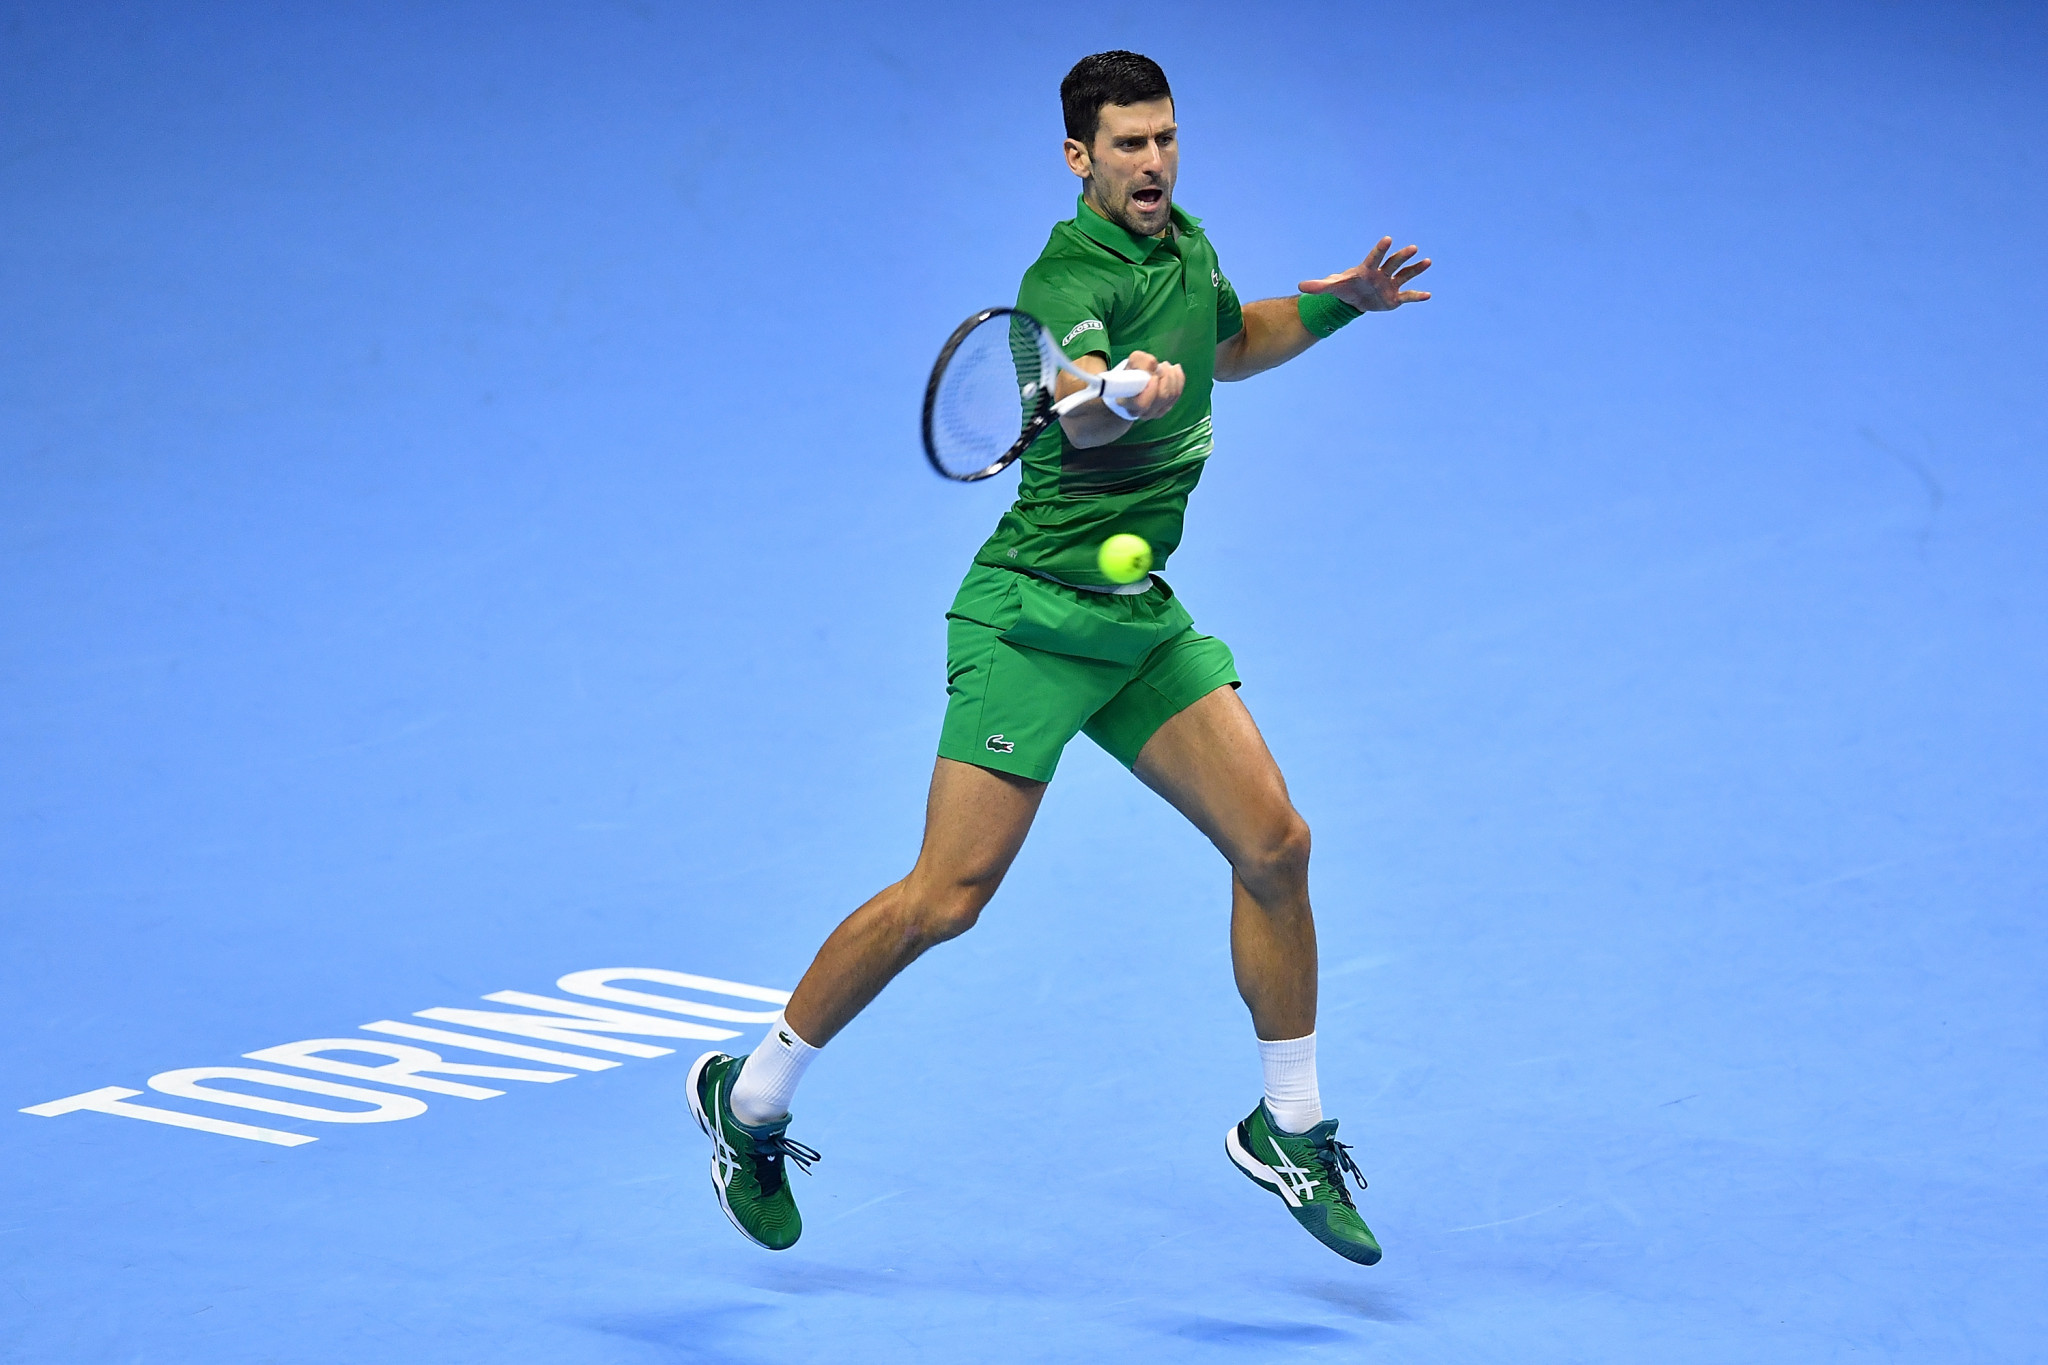 Djokovic and Ruud to meet in ATP Finals decider following straight sets wins